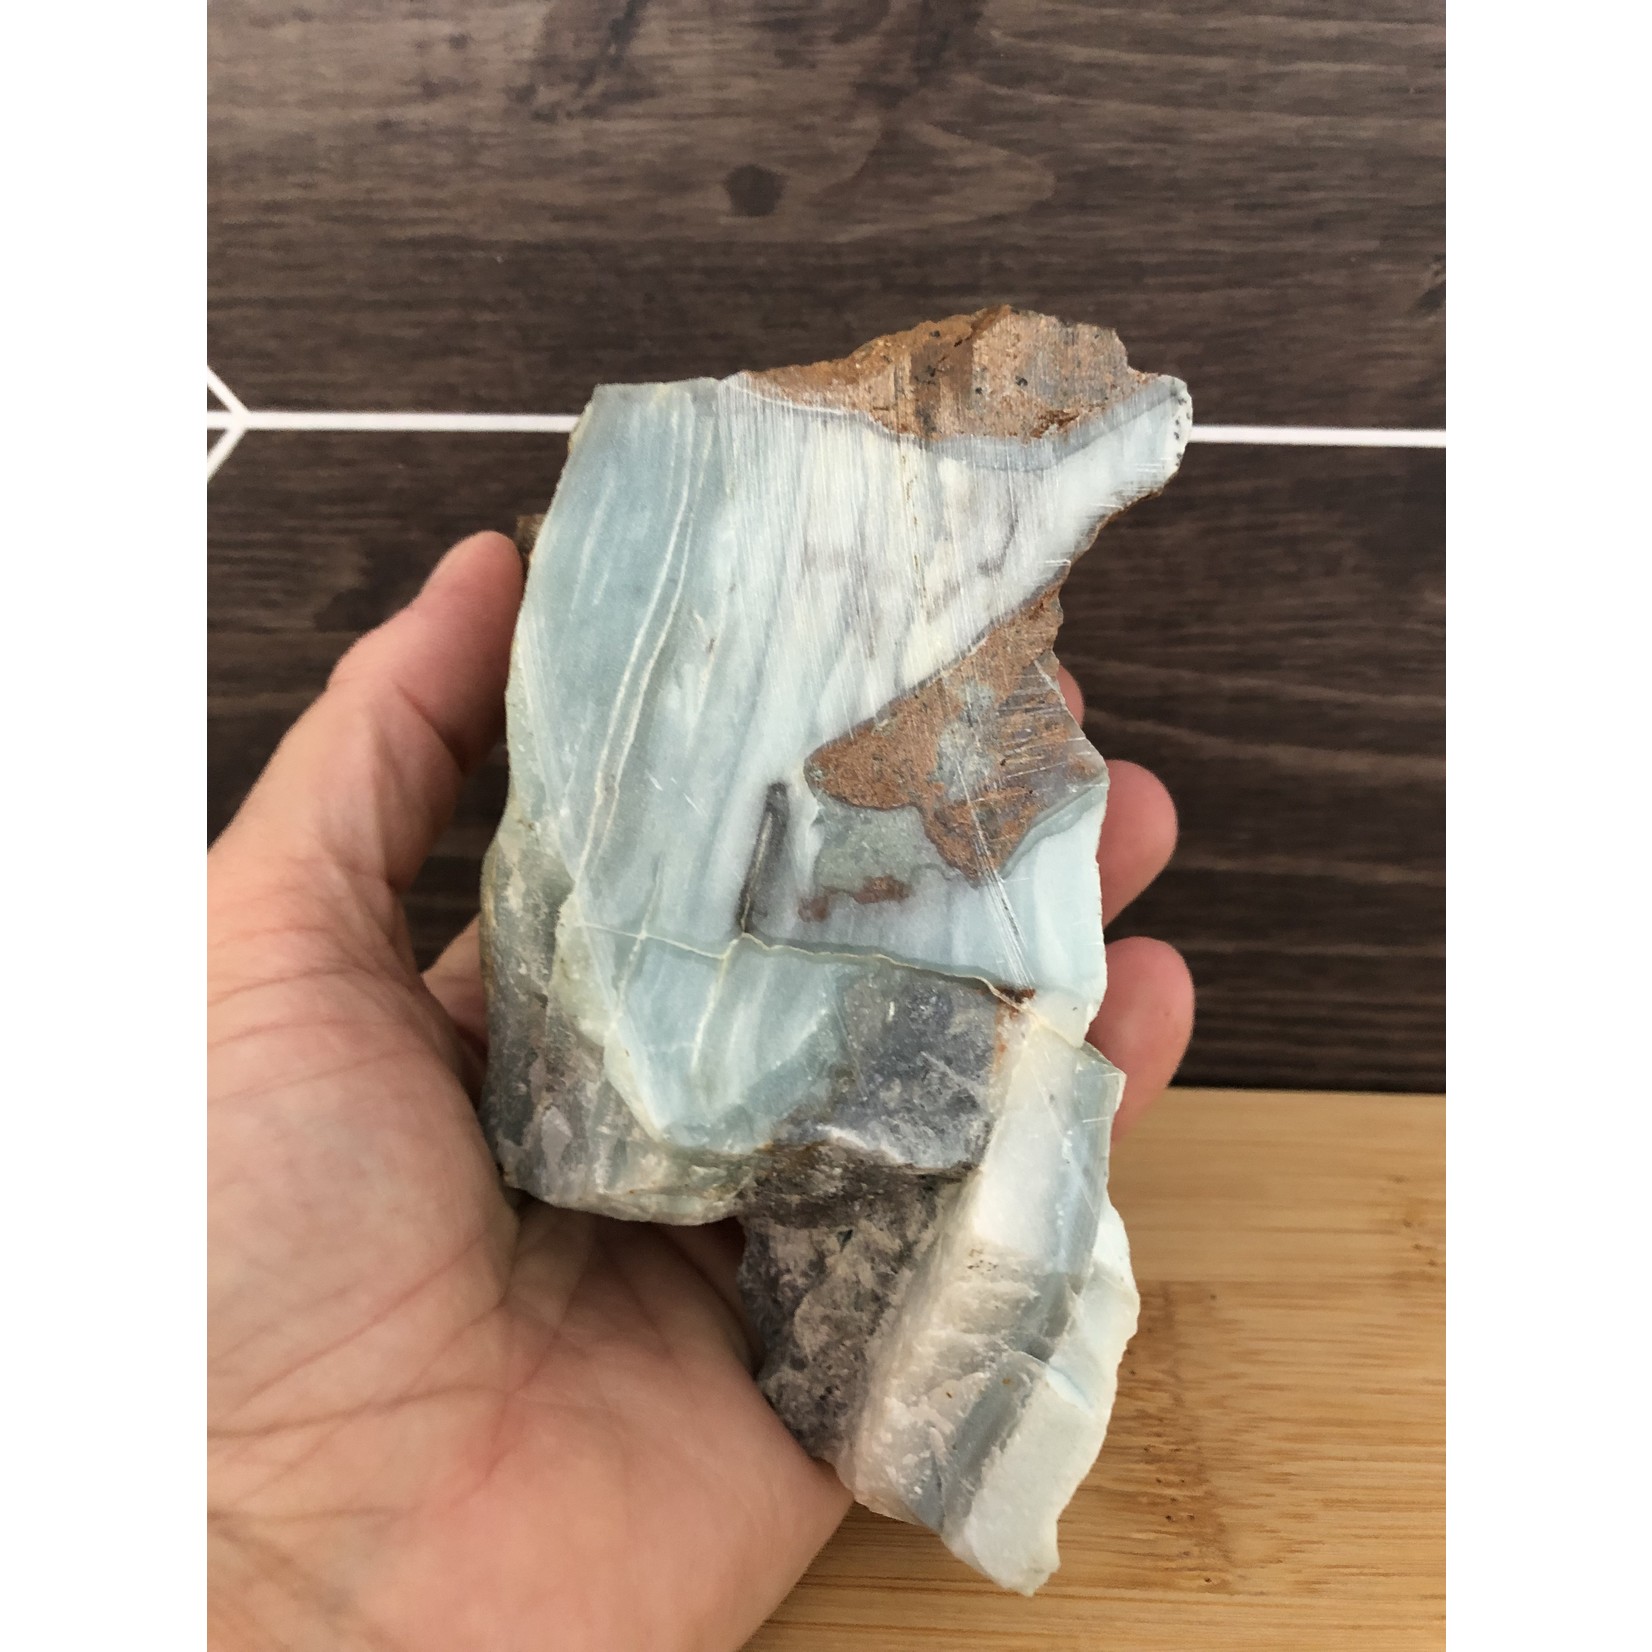 huge BC ocean picture stone, piece from British-Columbia, rough piece